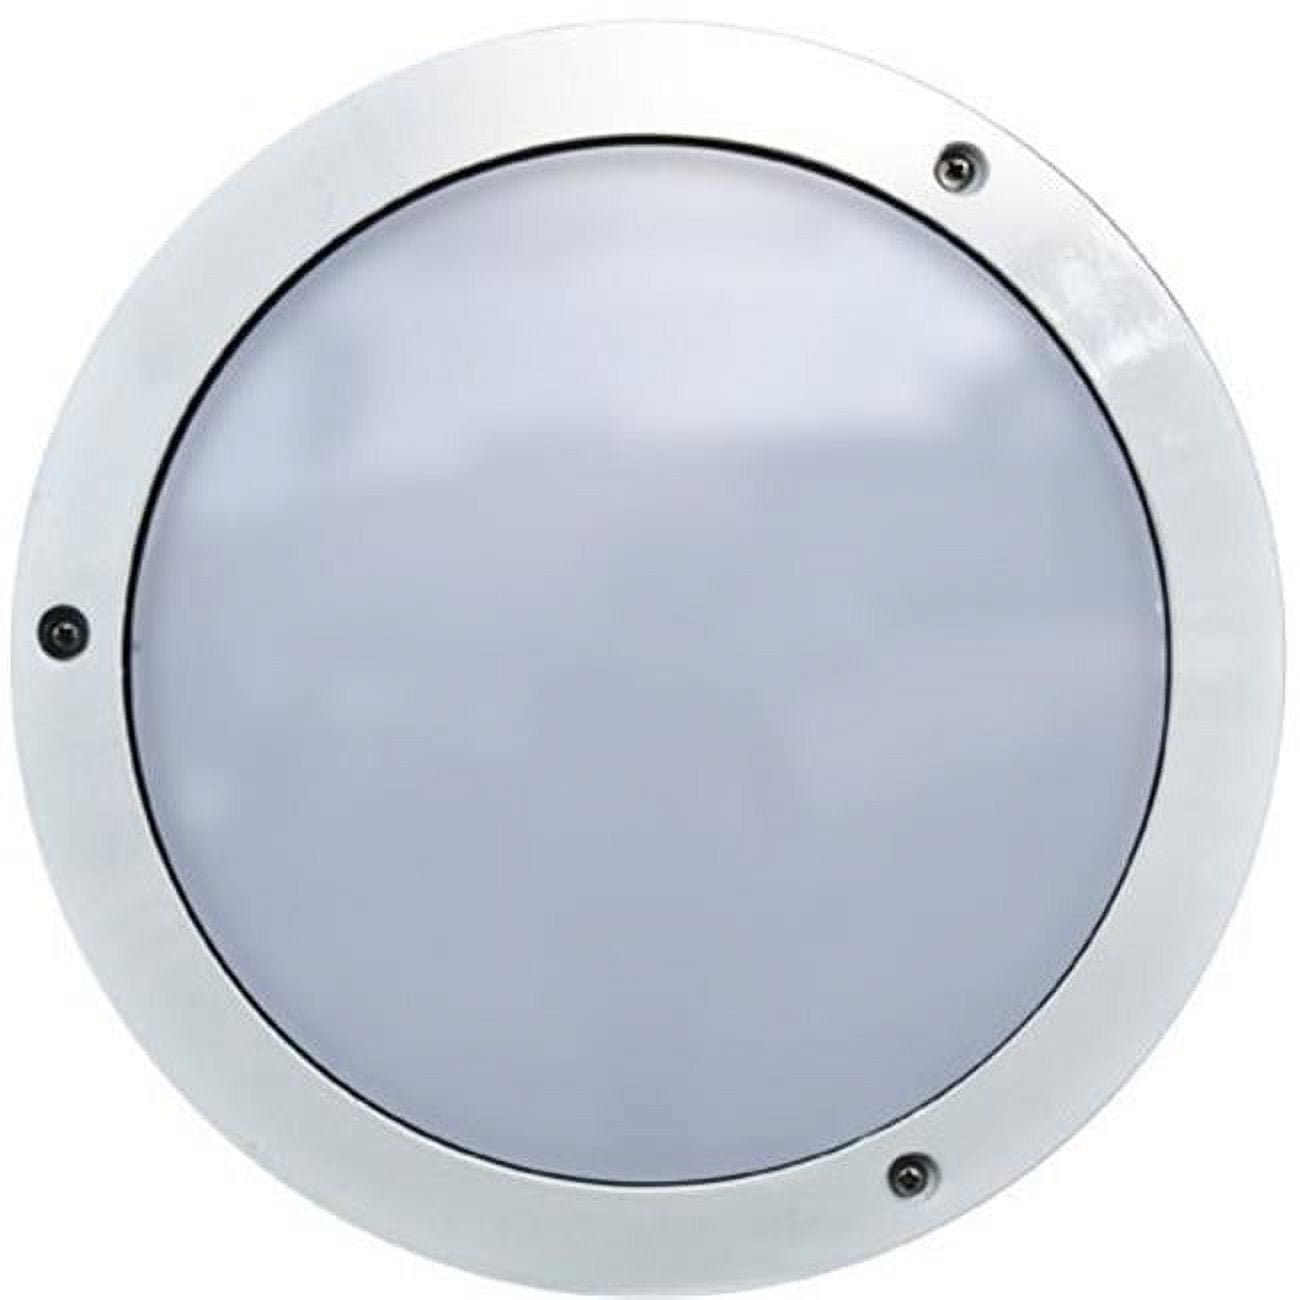 Picture of Dabmar Lighting W3983-W Powder Coated Cast Aluminum Surface Mounted Wall Fixture - 26W 120V, White